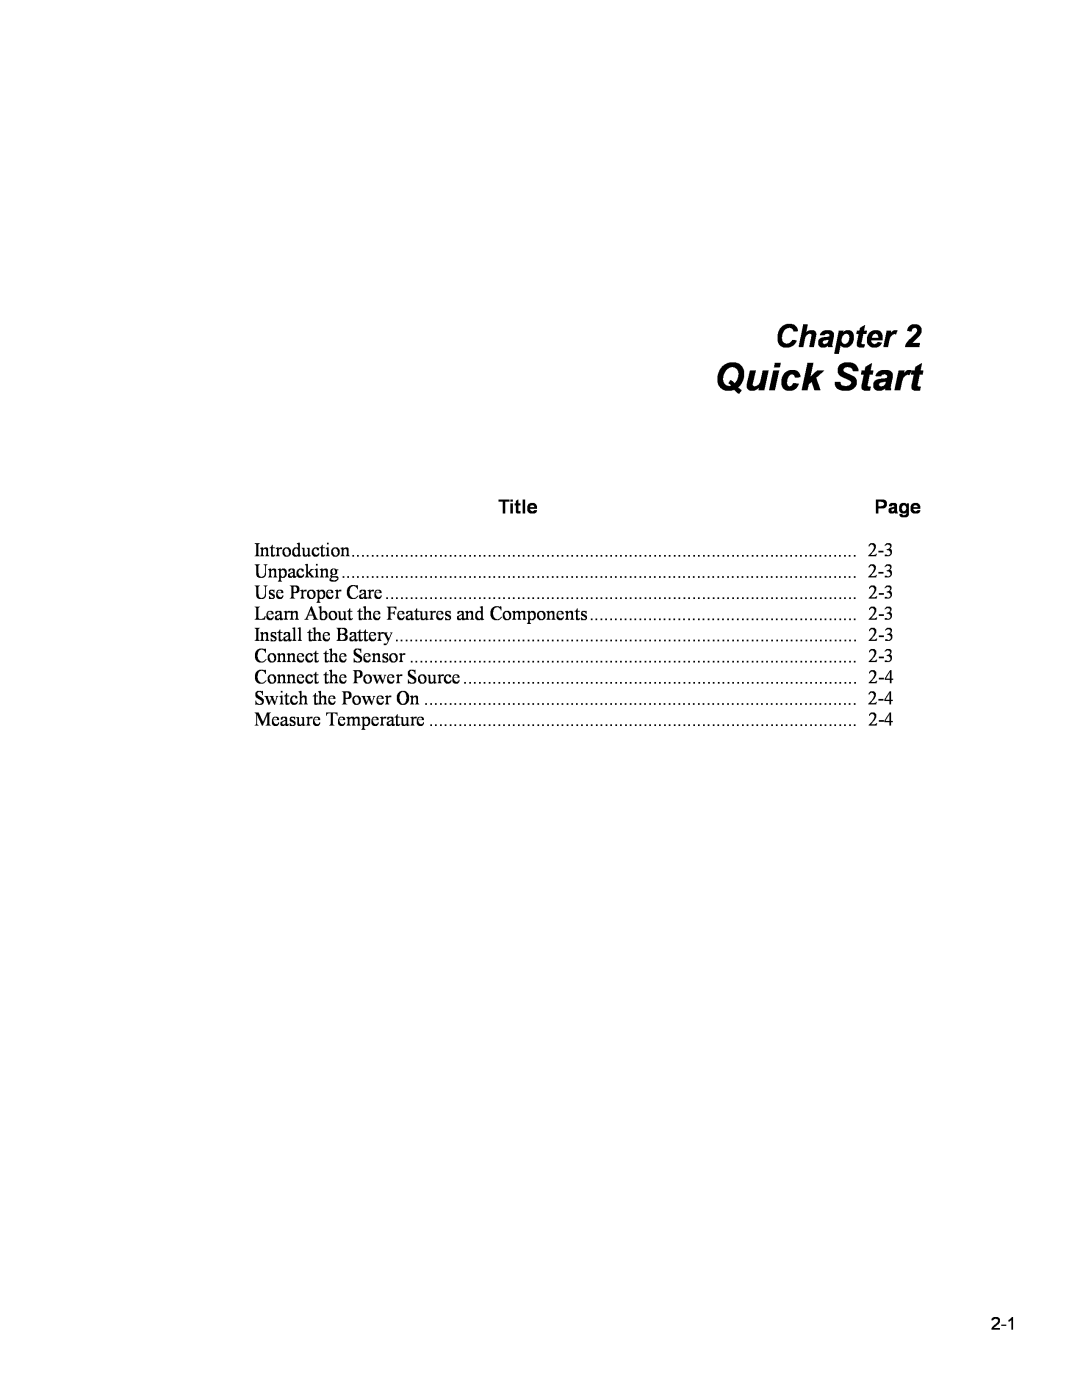 Fluke 5020A user manual Quick Start, Chapter, Title, Page 